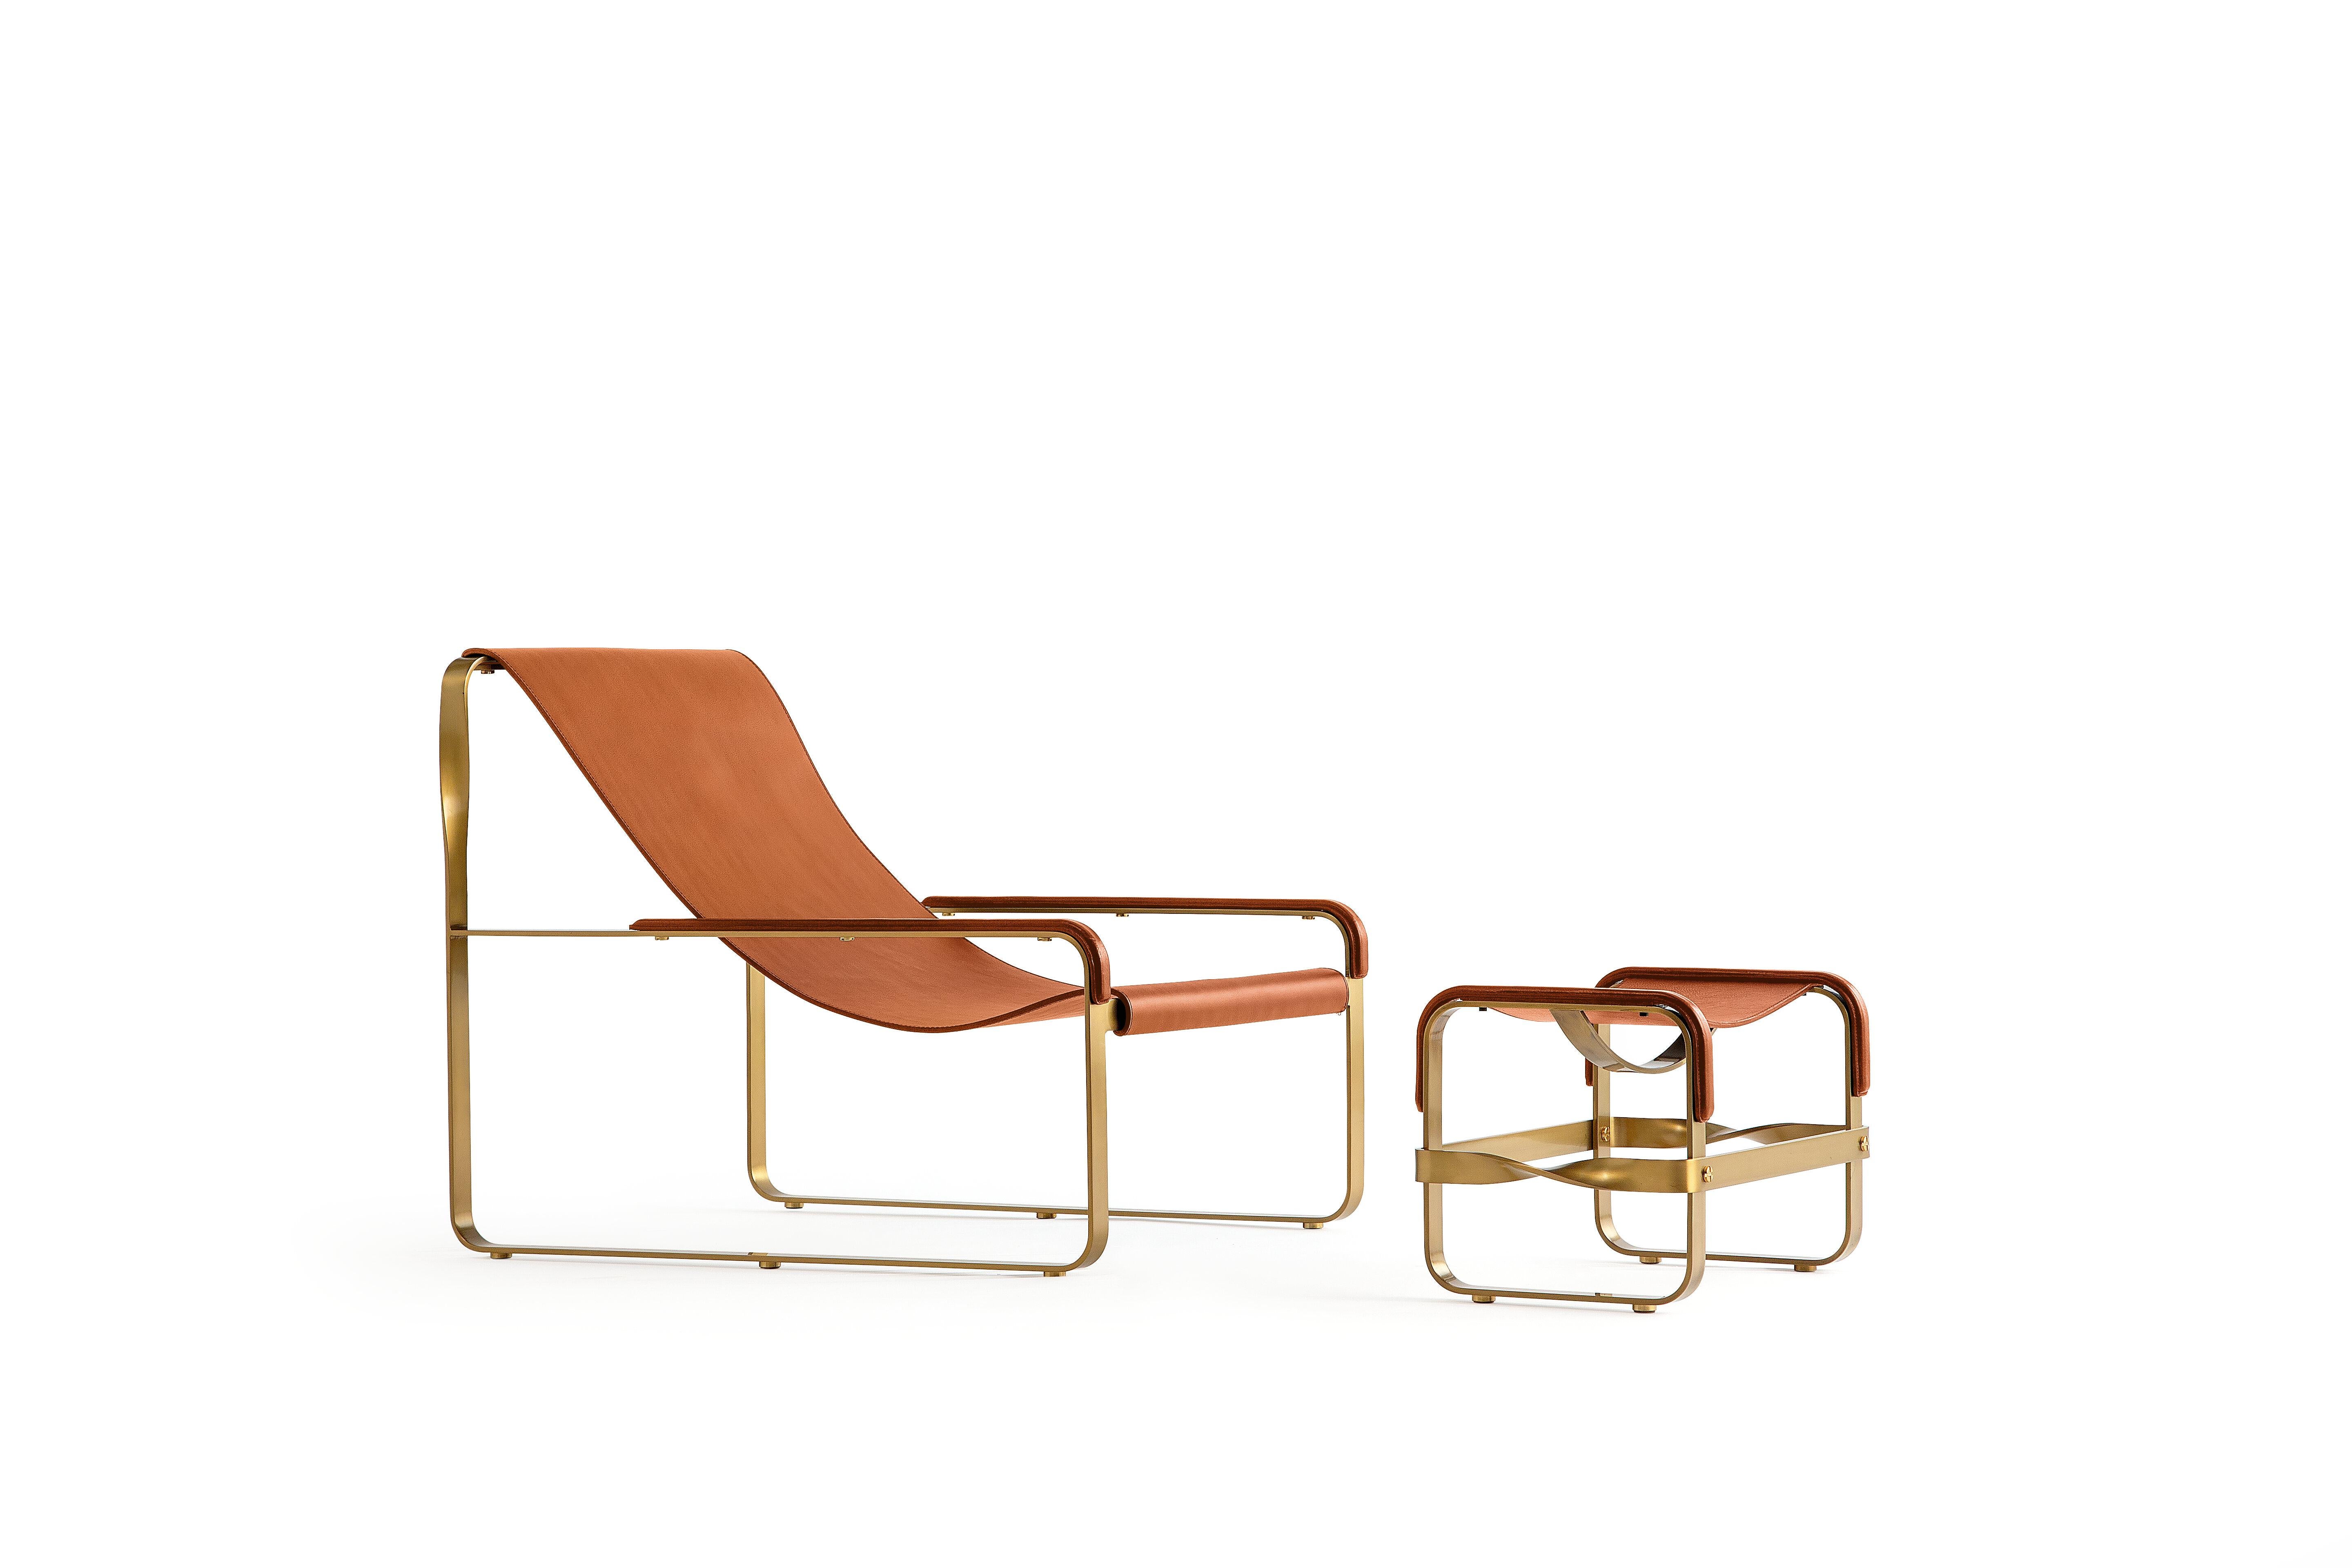 Pair Contemporary Chaise Longue & Footstool Aged Brass Metal & Natural Leather For Sale 2